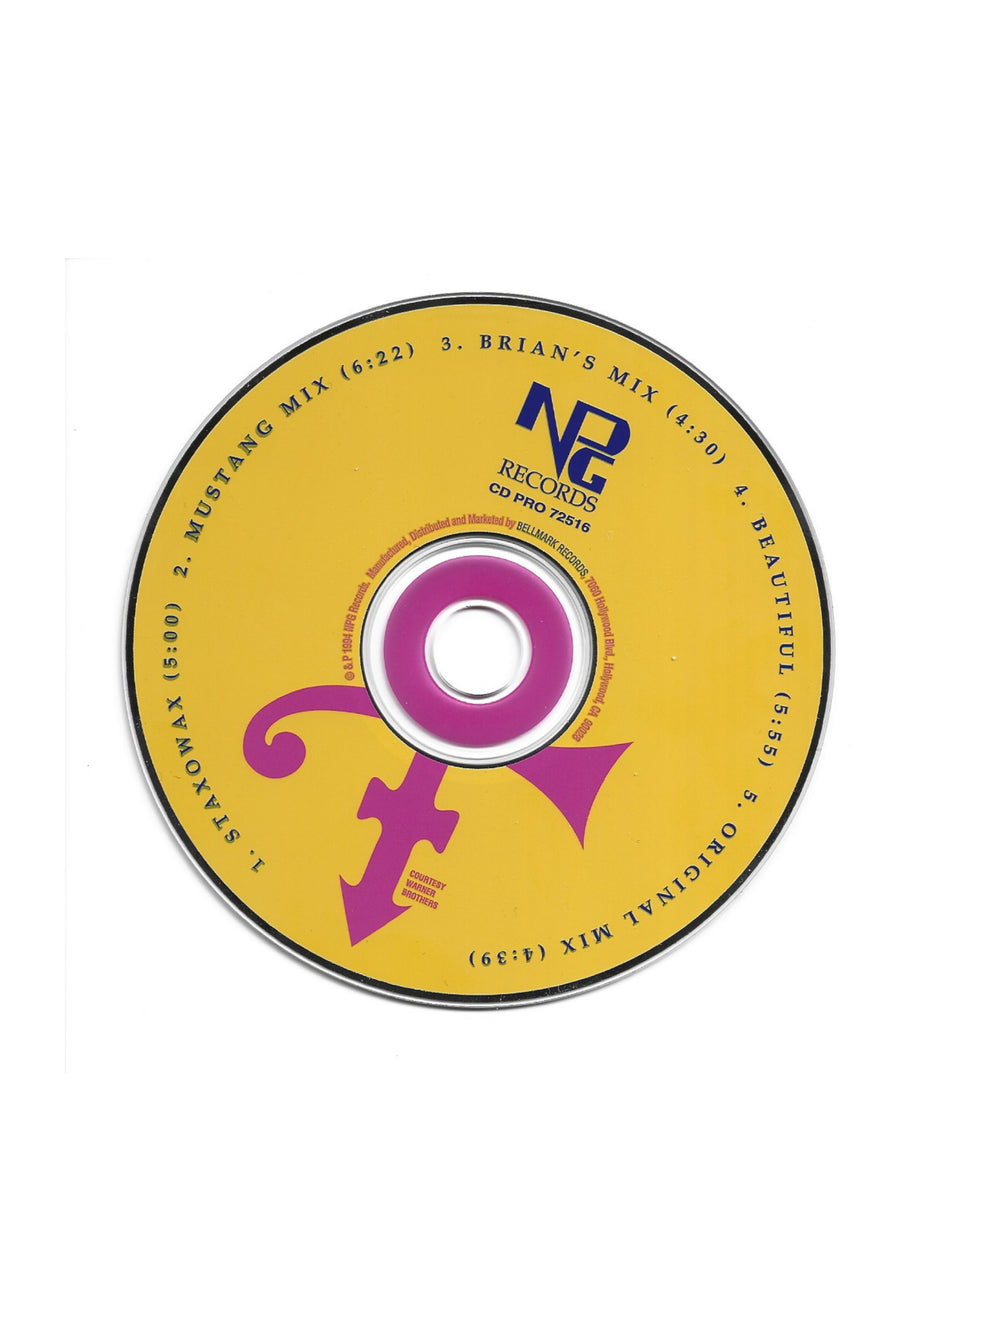 Prince 0(+> – The Most Beautiful Girl In The World CD Promo NPG Records Preloved: 1994